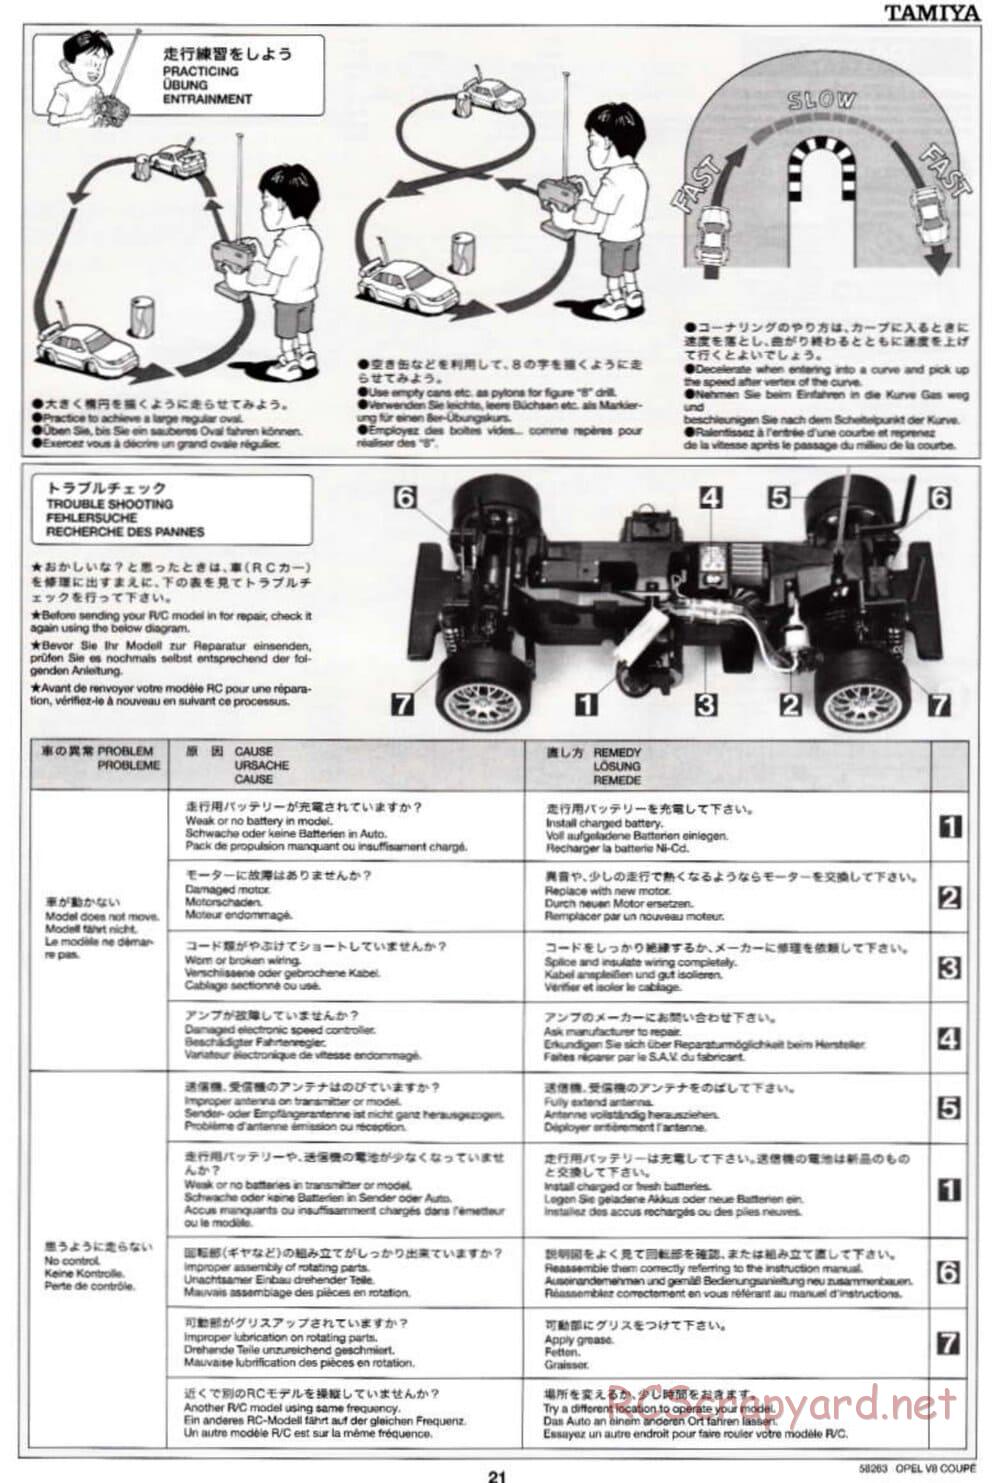 Tamiya - Opel V8 Coupe - TL-01 Chassis - Manual - Page 21